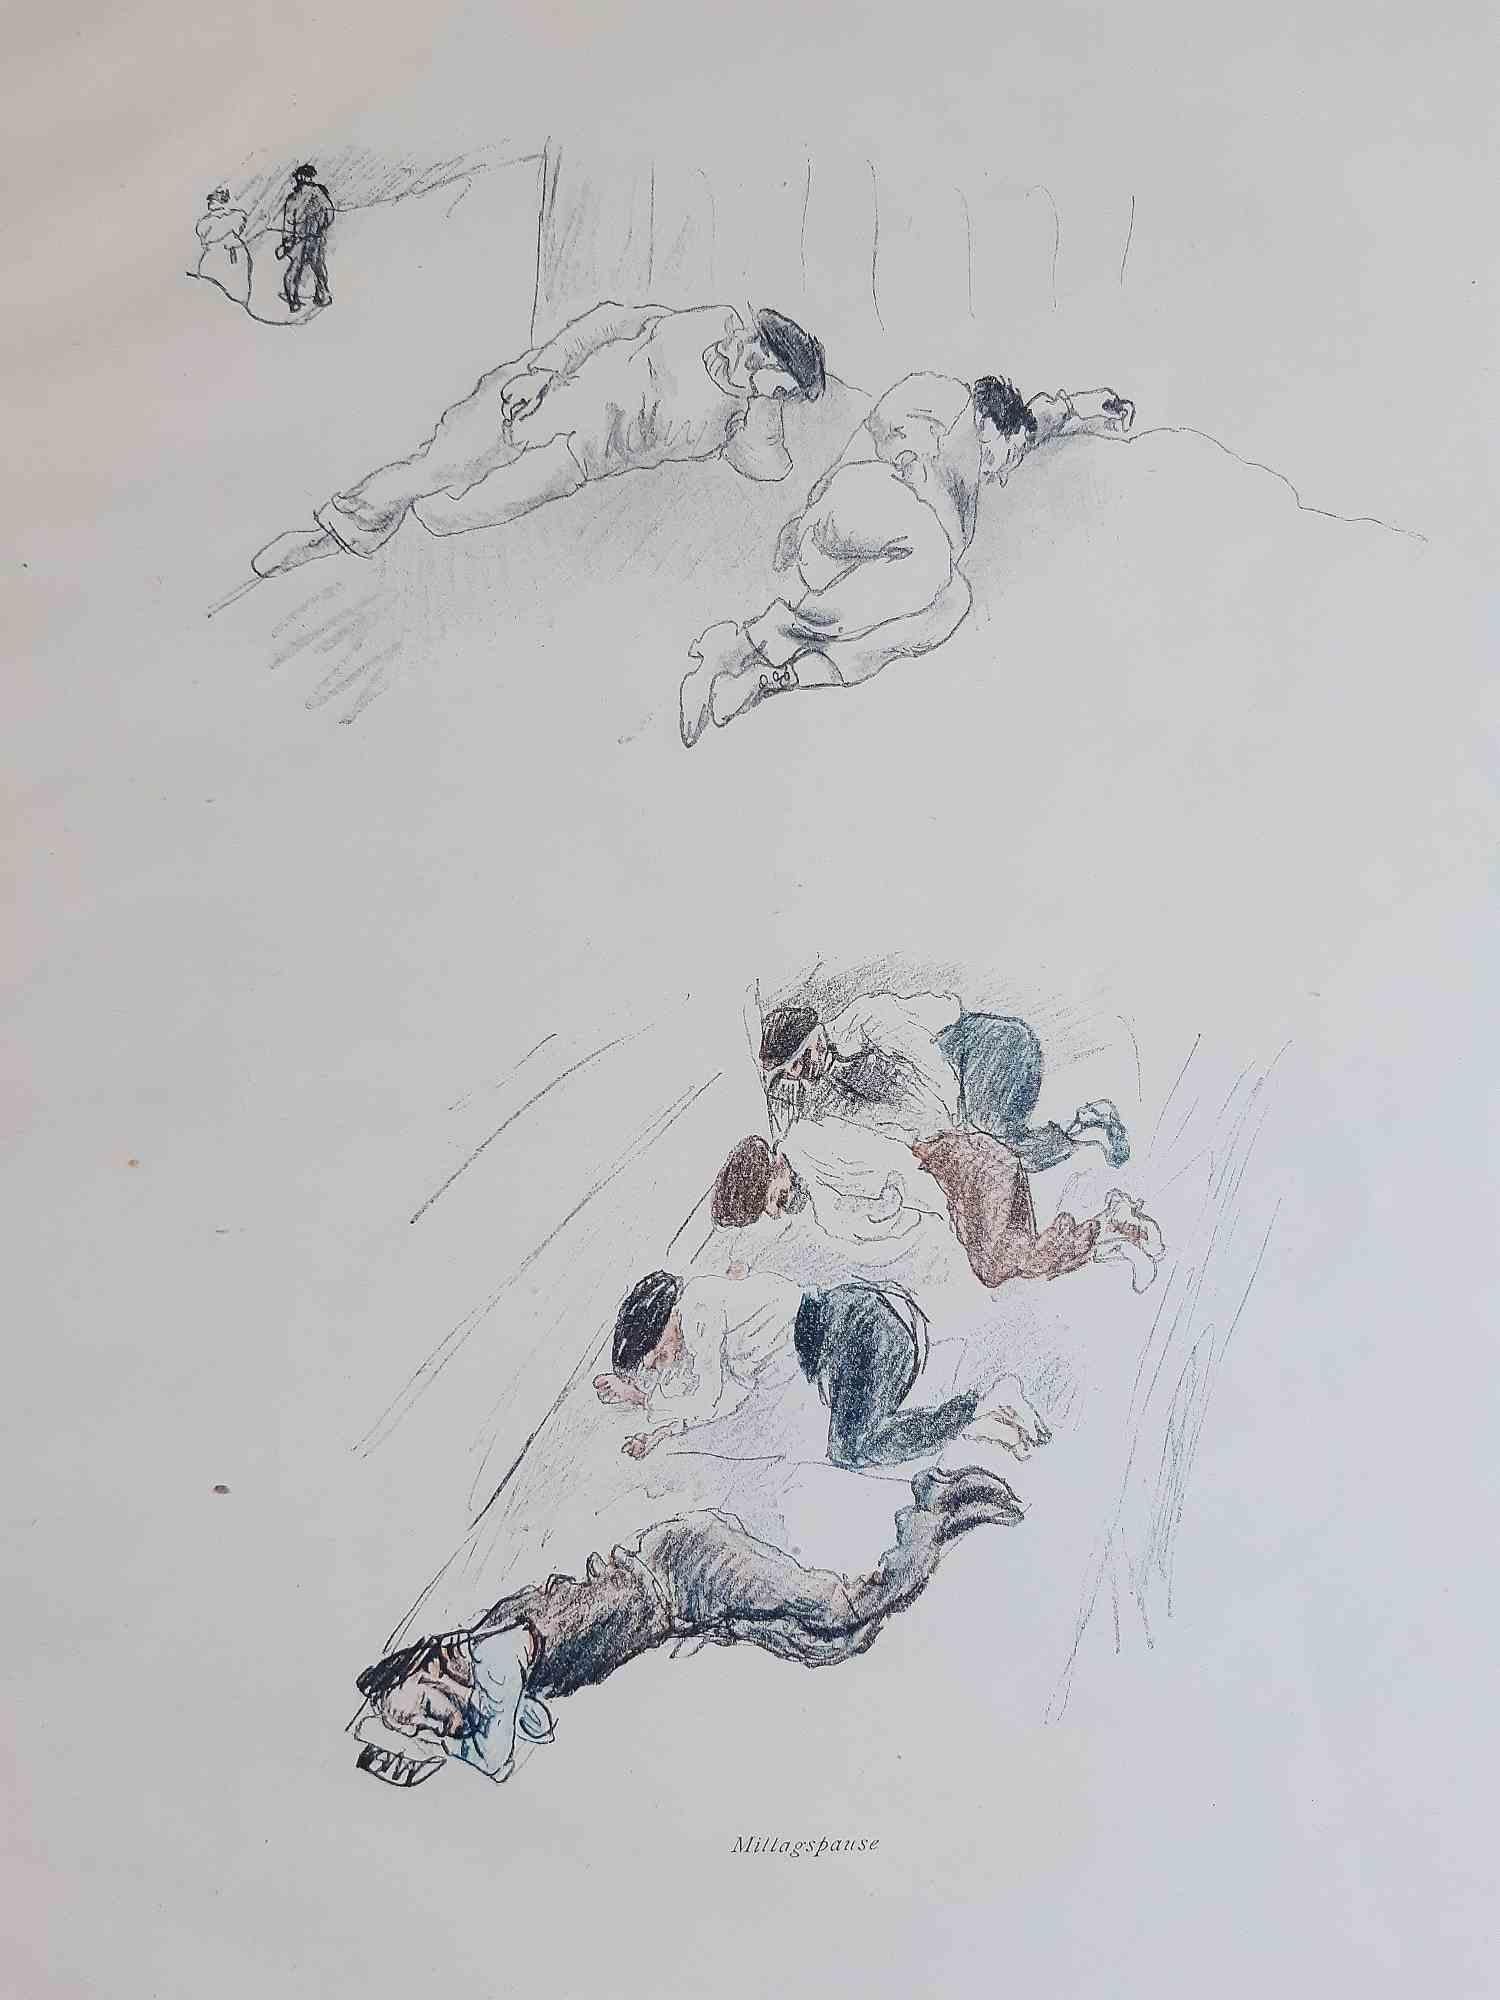 Ein sommer is an original Rare Book engraved by Jules Pascin (March 31, 1885 – June 5, 1930) in 1920.

Original First Edition.

Published by Bruno Cassirer, Berlin.

Format: in Folio°. The dimensions and the weight are indicative.

The book includes